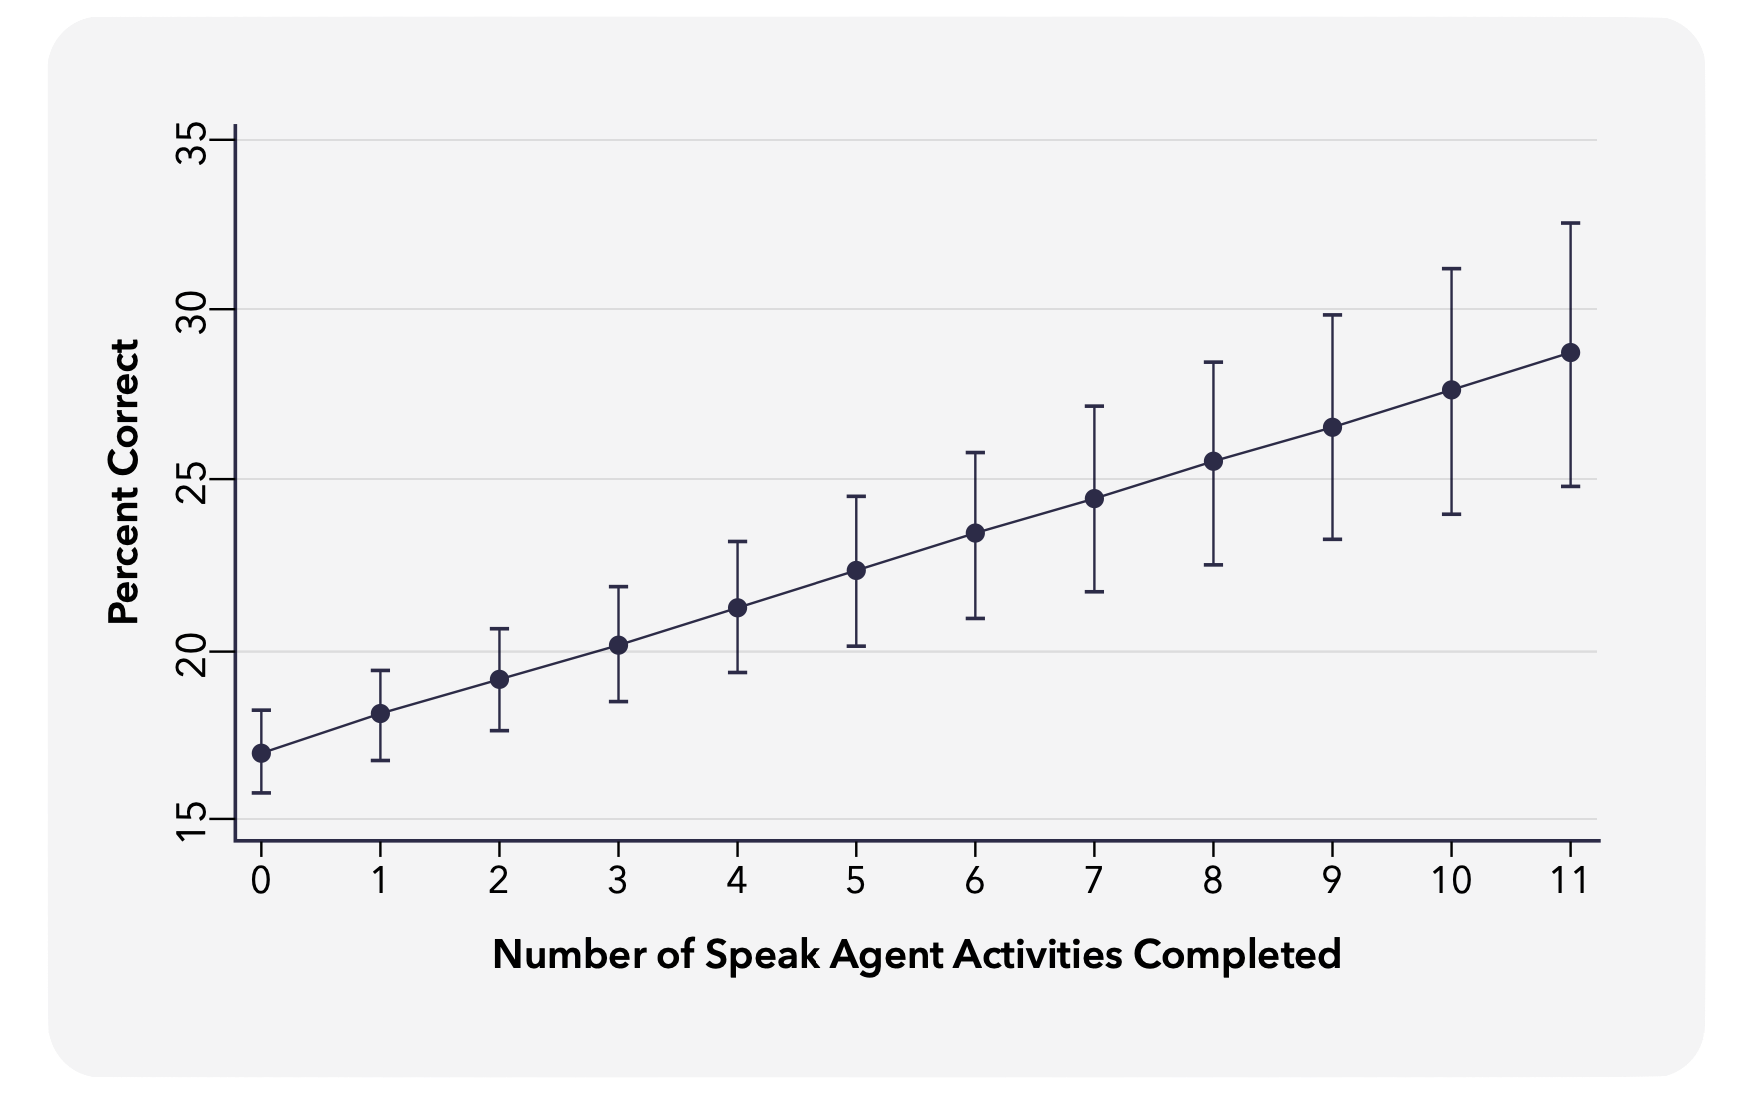 Y axis represents percent correct. X axis represents the number of Speak Agent activities completed. The more activities completed, the higher percent correct is. A student who completes three activities may be expected to achieve almost about 20 percent correct. A student who completes seven activities may be expected to achieve almost 25 percent correct. A student who completes 11 activities may be expected to achieve approximately 28 percent correct.